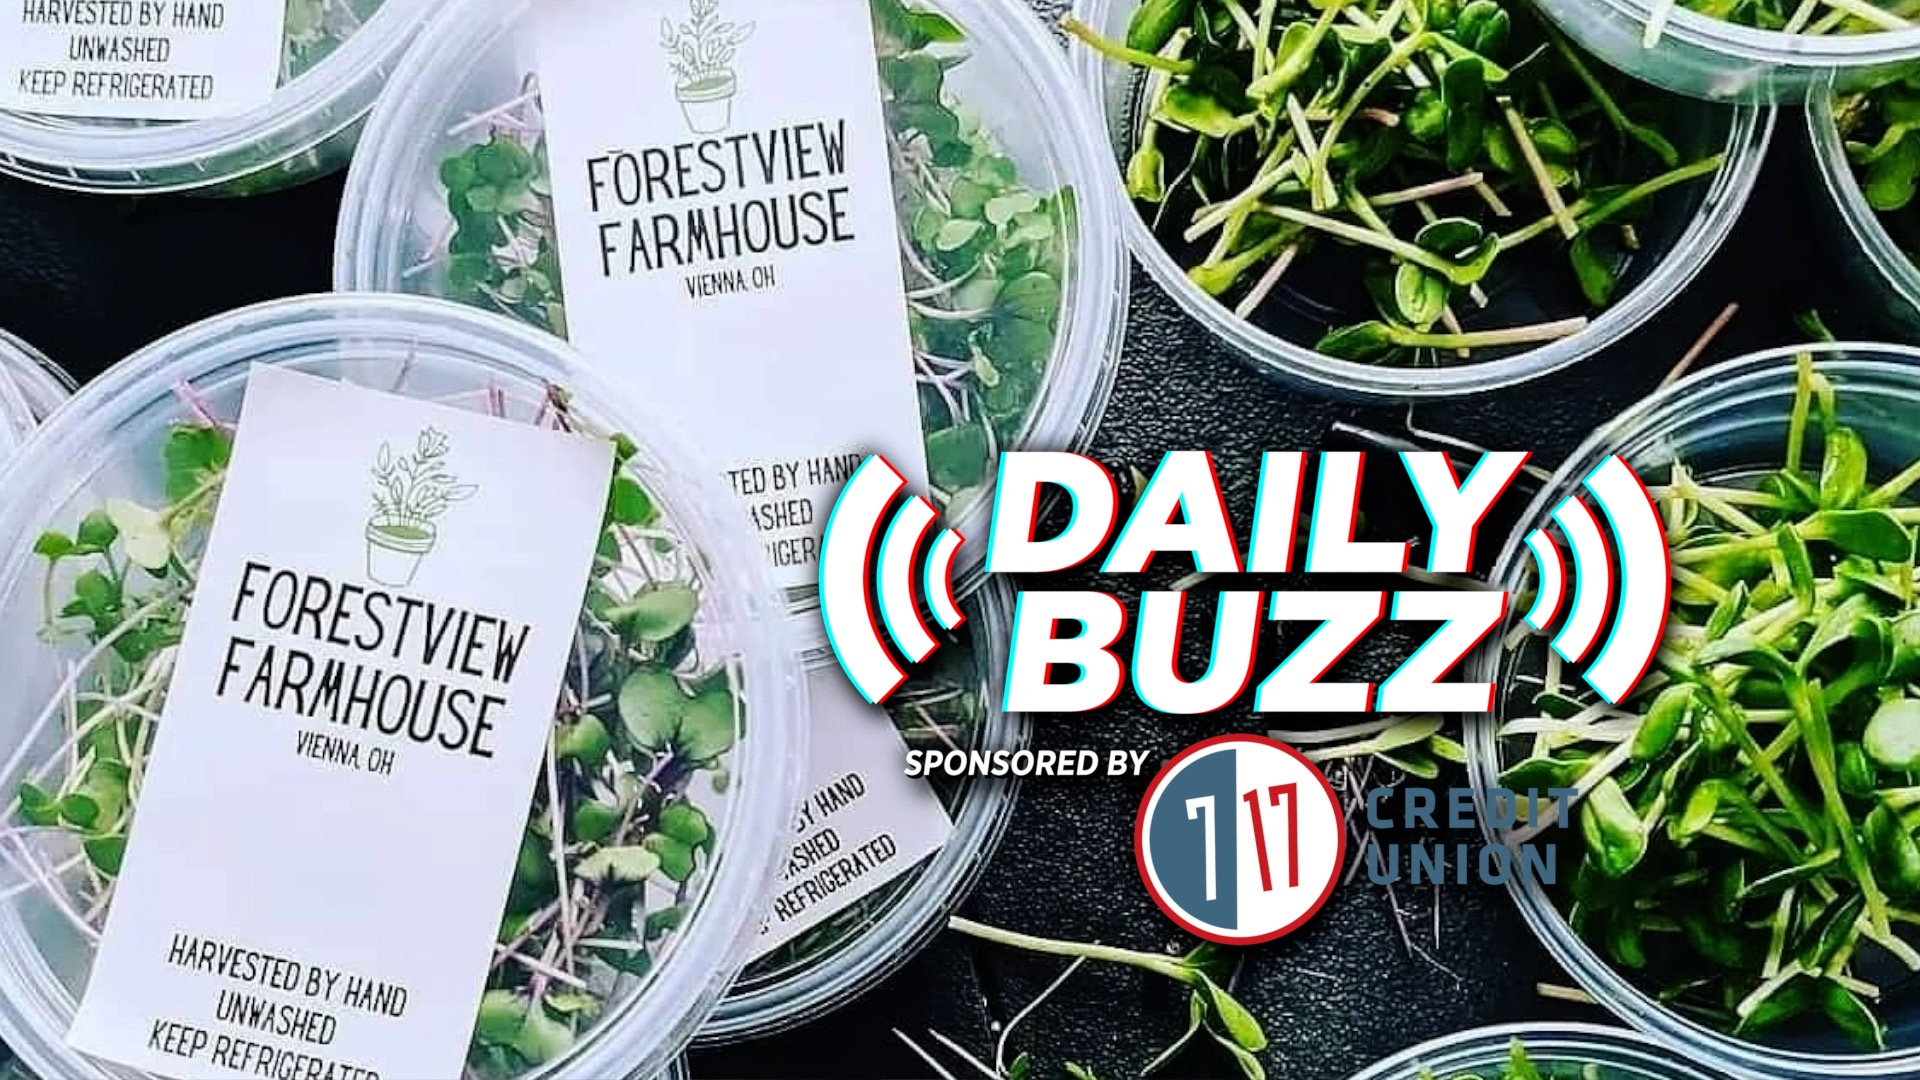 Forestview Farmhouse Grows From Microgreens